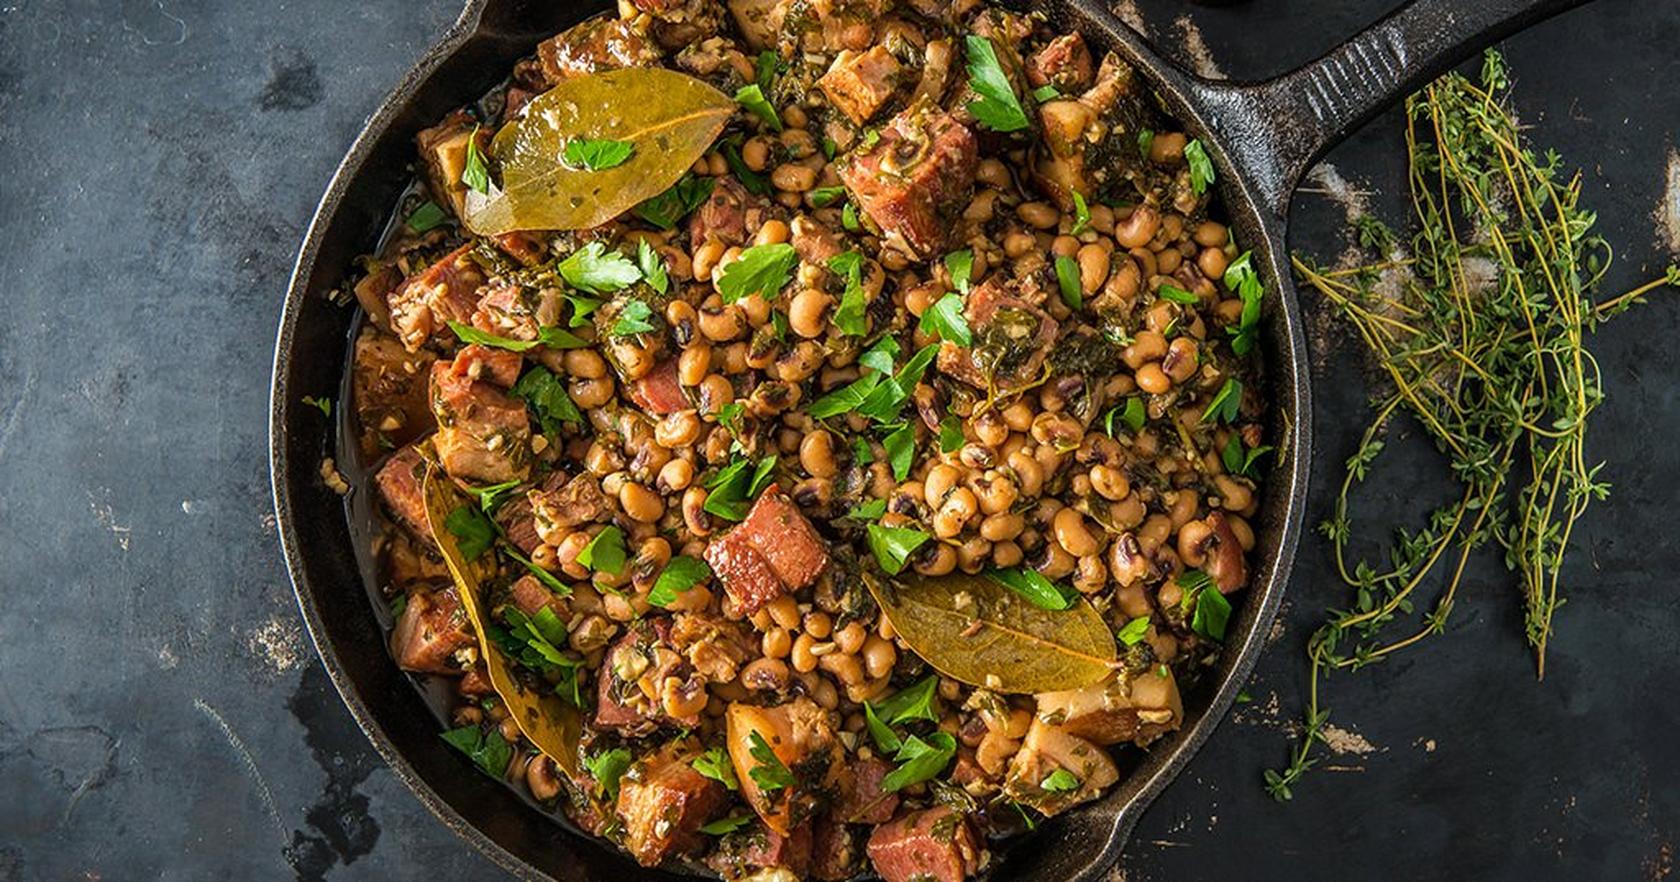 black-eyed-peas-bacon_Traeger-Wood-Fired-Grills_RE_HE_M